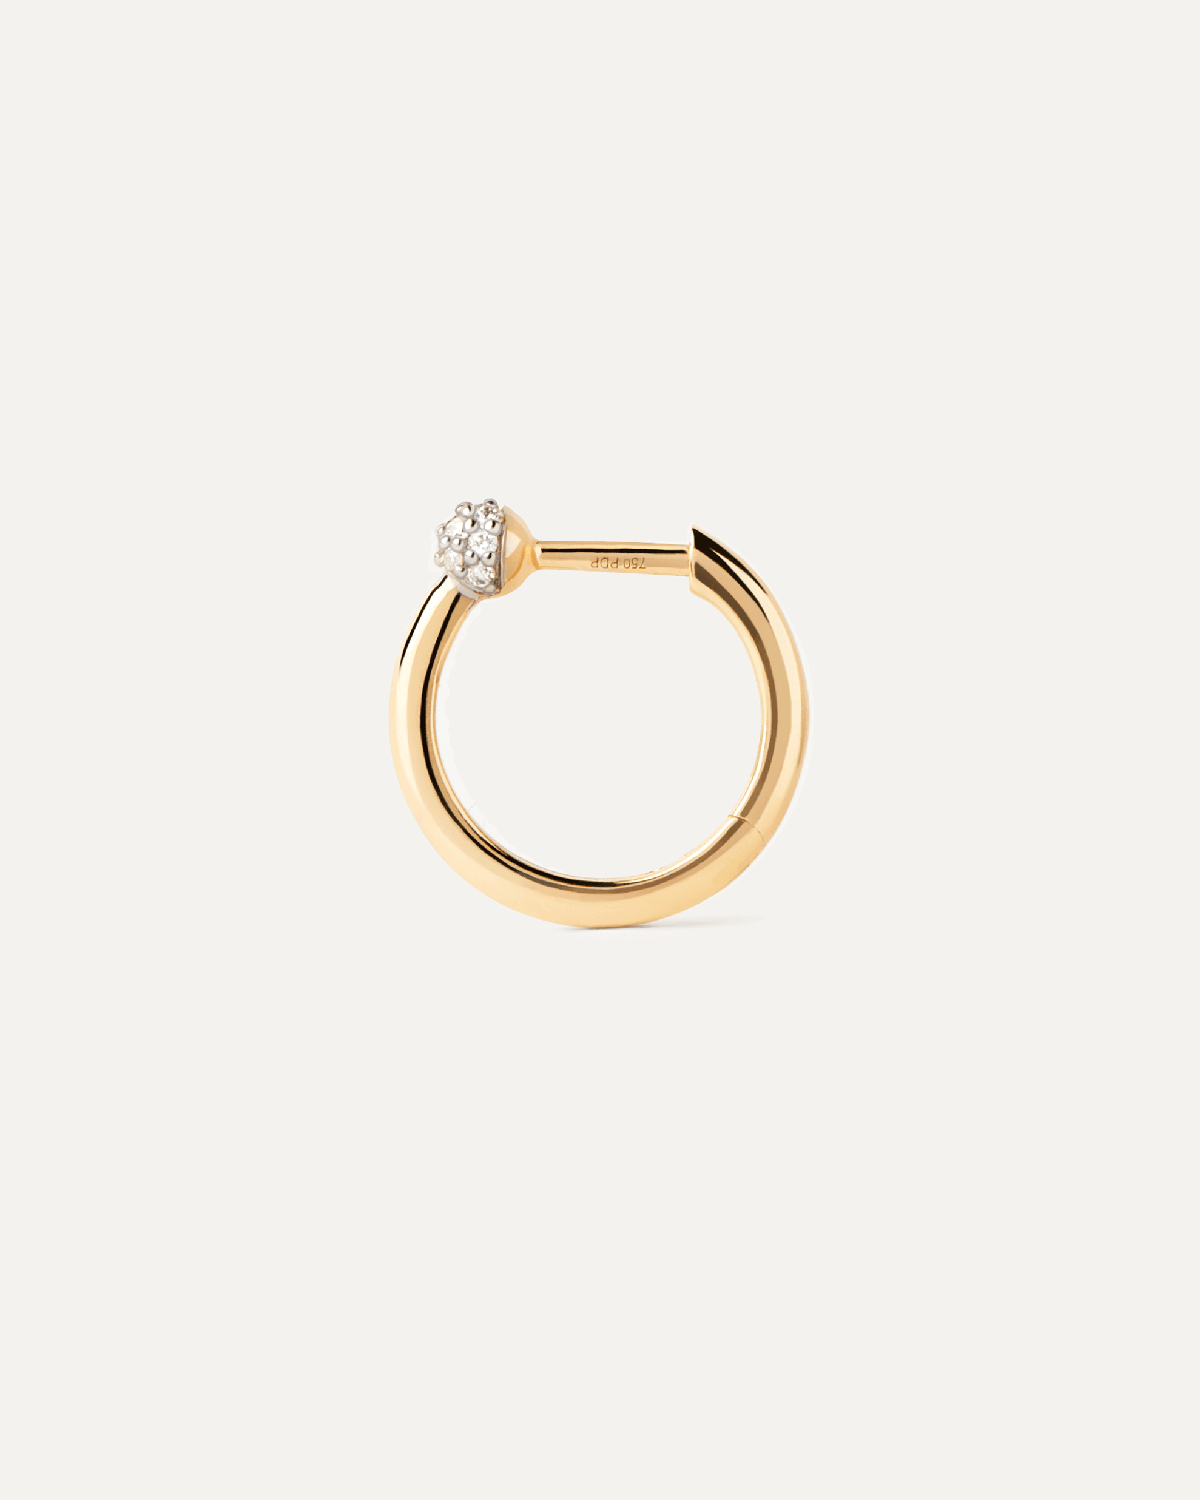 Diamonds and gold Chai single hoop. Distinctive single hoop in solid yellow gold topped with a round pavé lab-grown diamond. Get the latest arrival from PDPAOLA. Place your order safely and get this Best Seller.